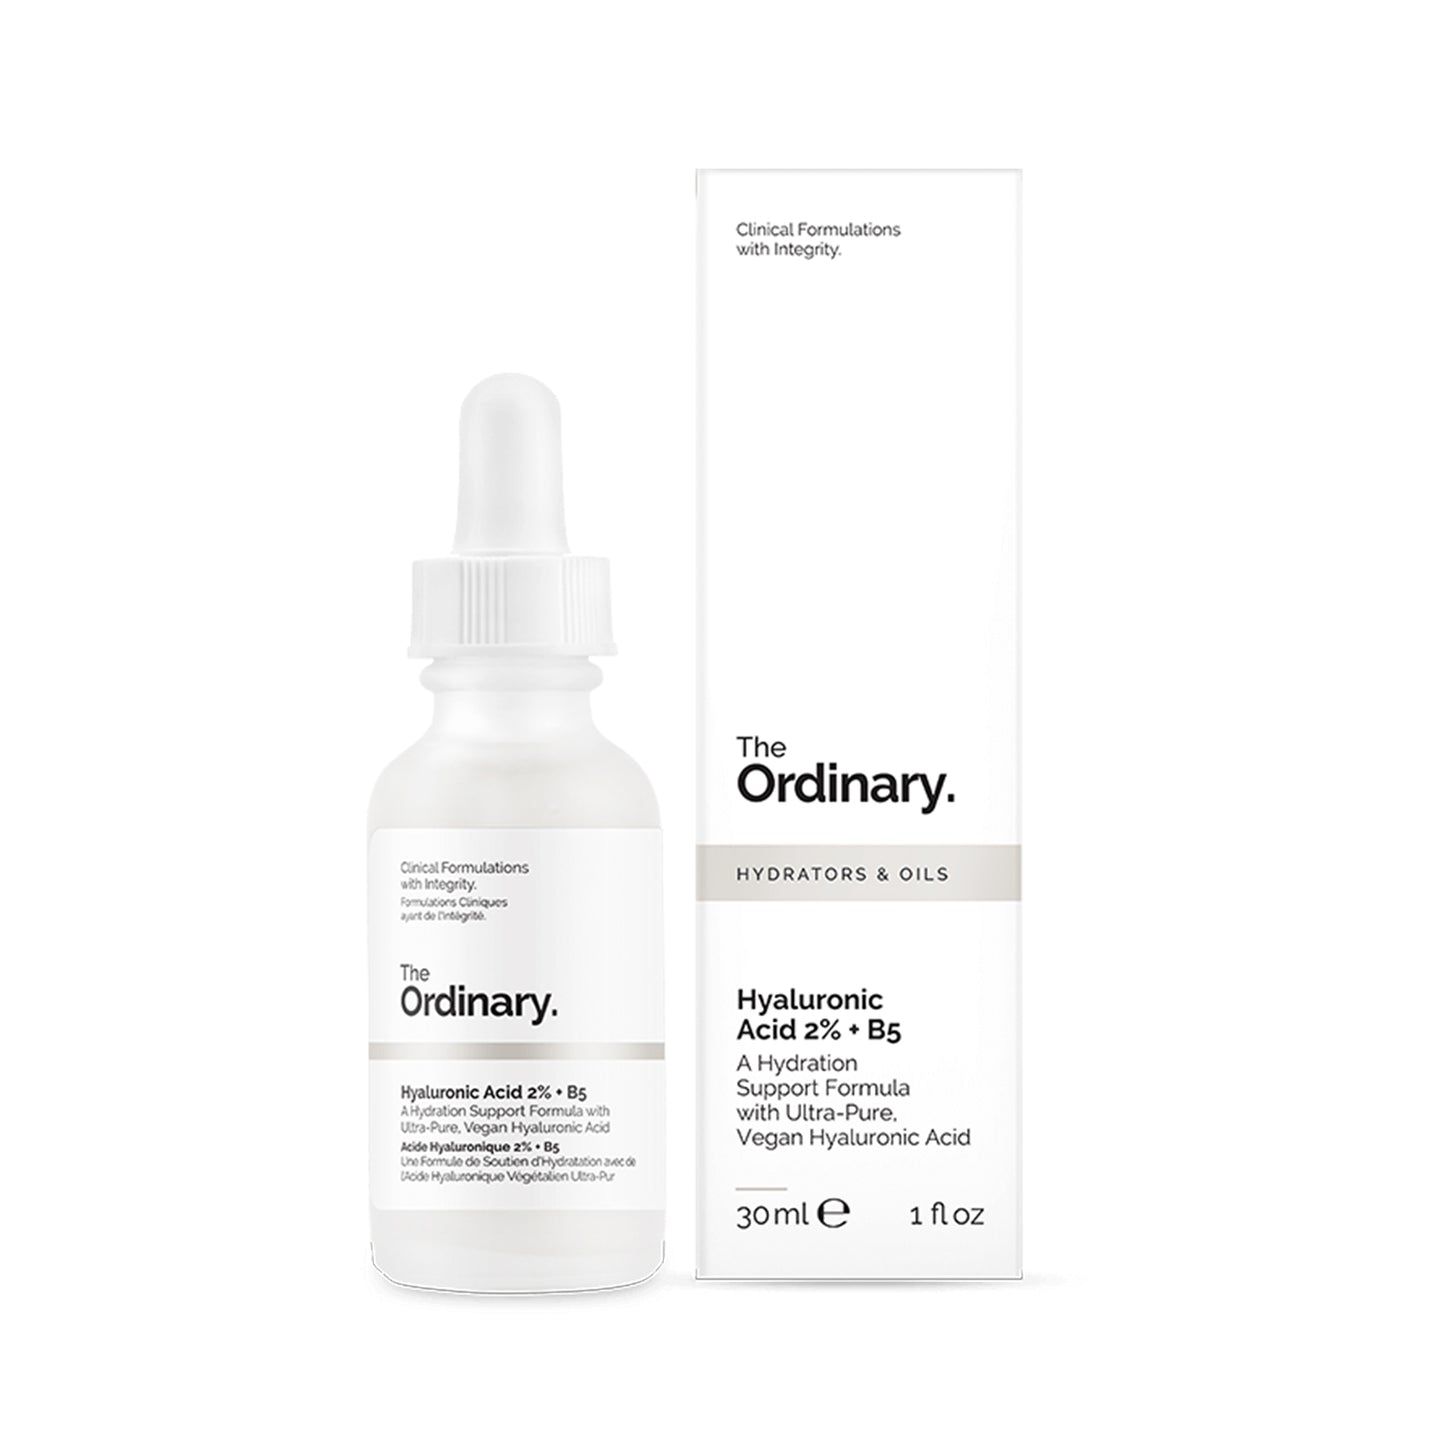 The Ordinary Hyaluronic Acid 2% + B5. Cash on delivery in karachi, lahore, islamabad, pakistan.